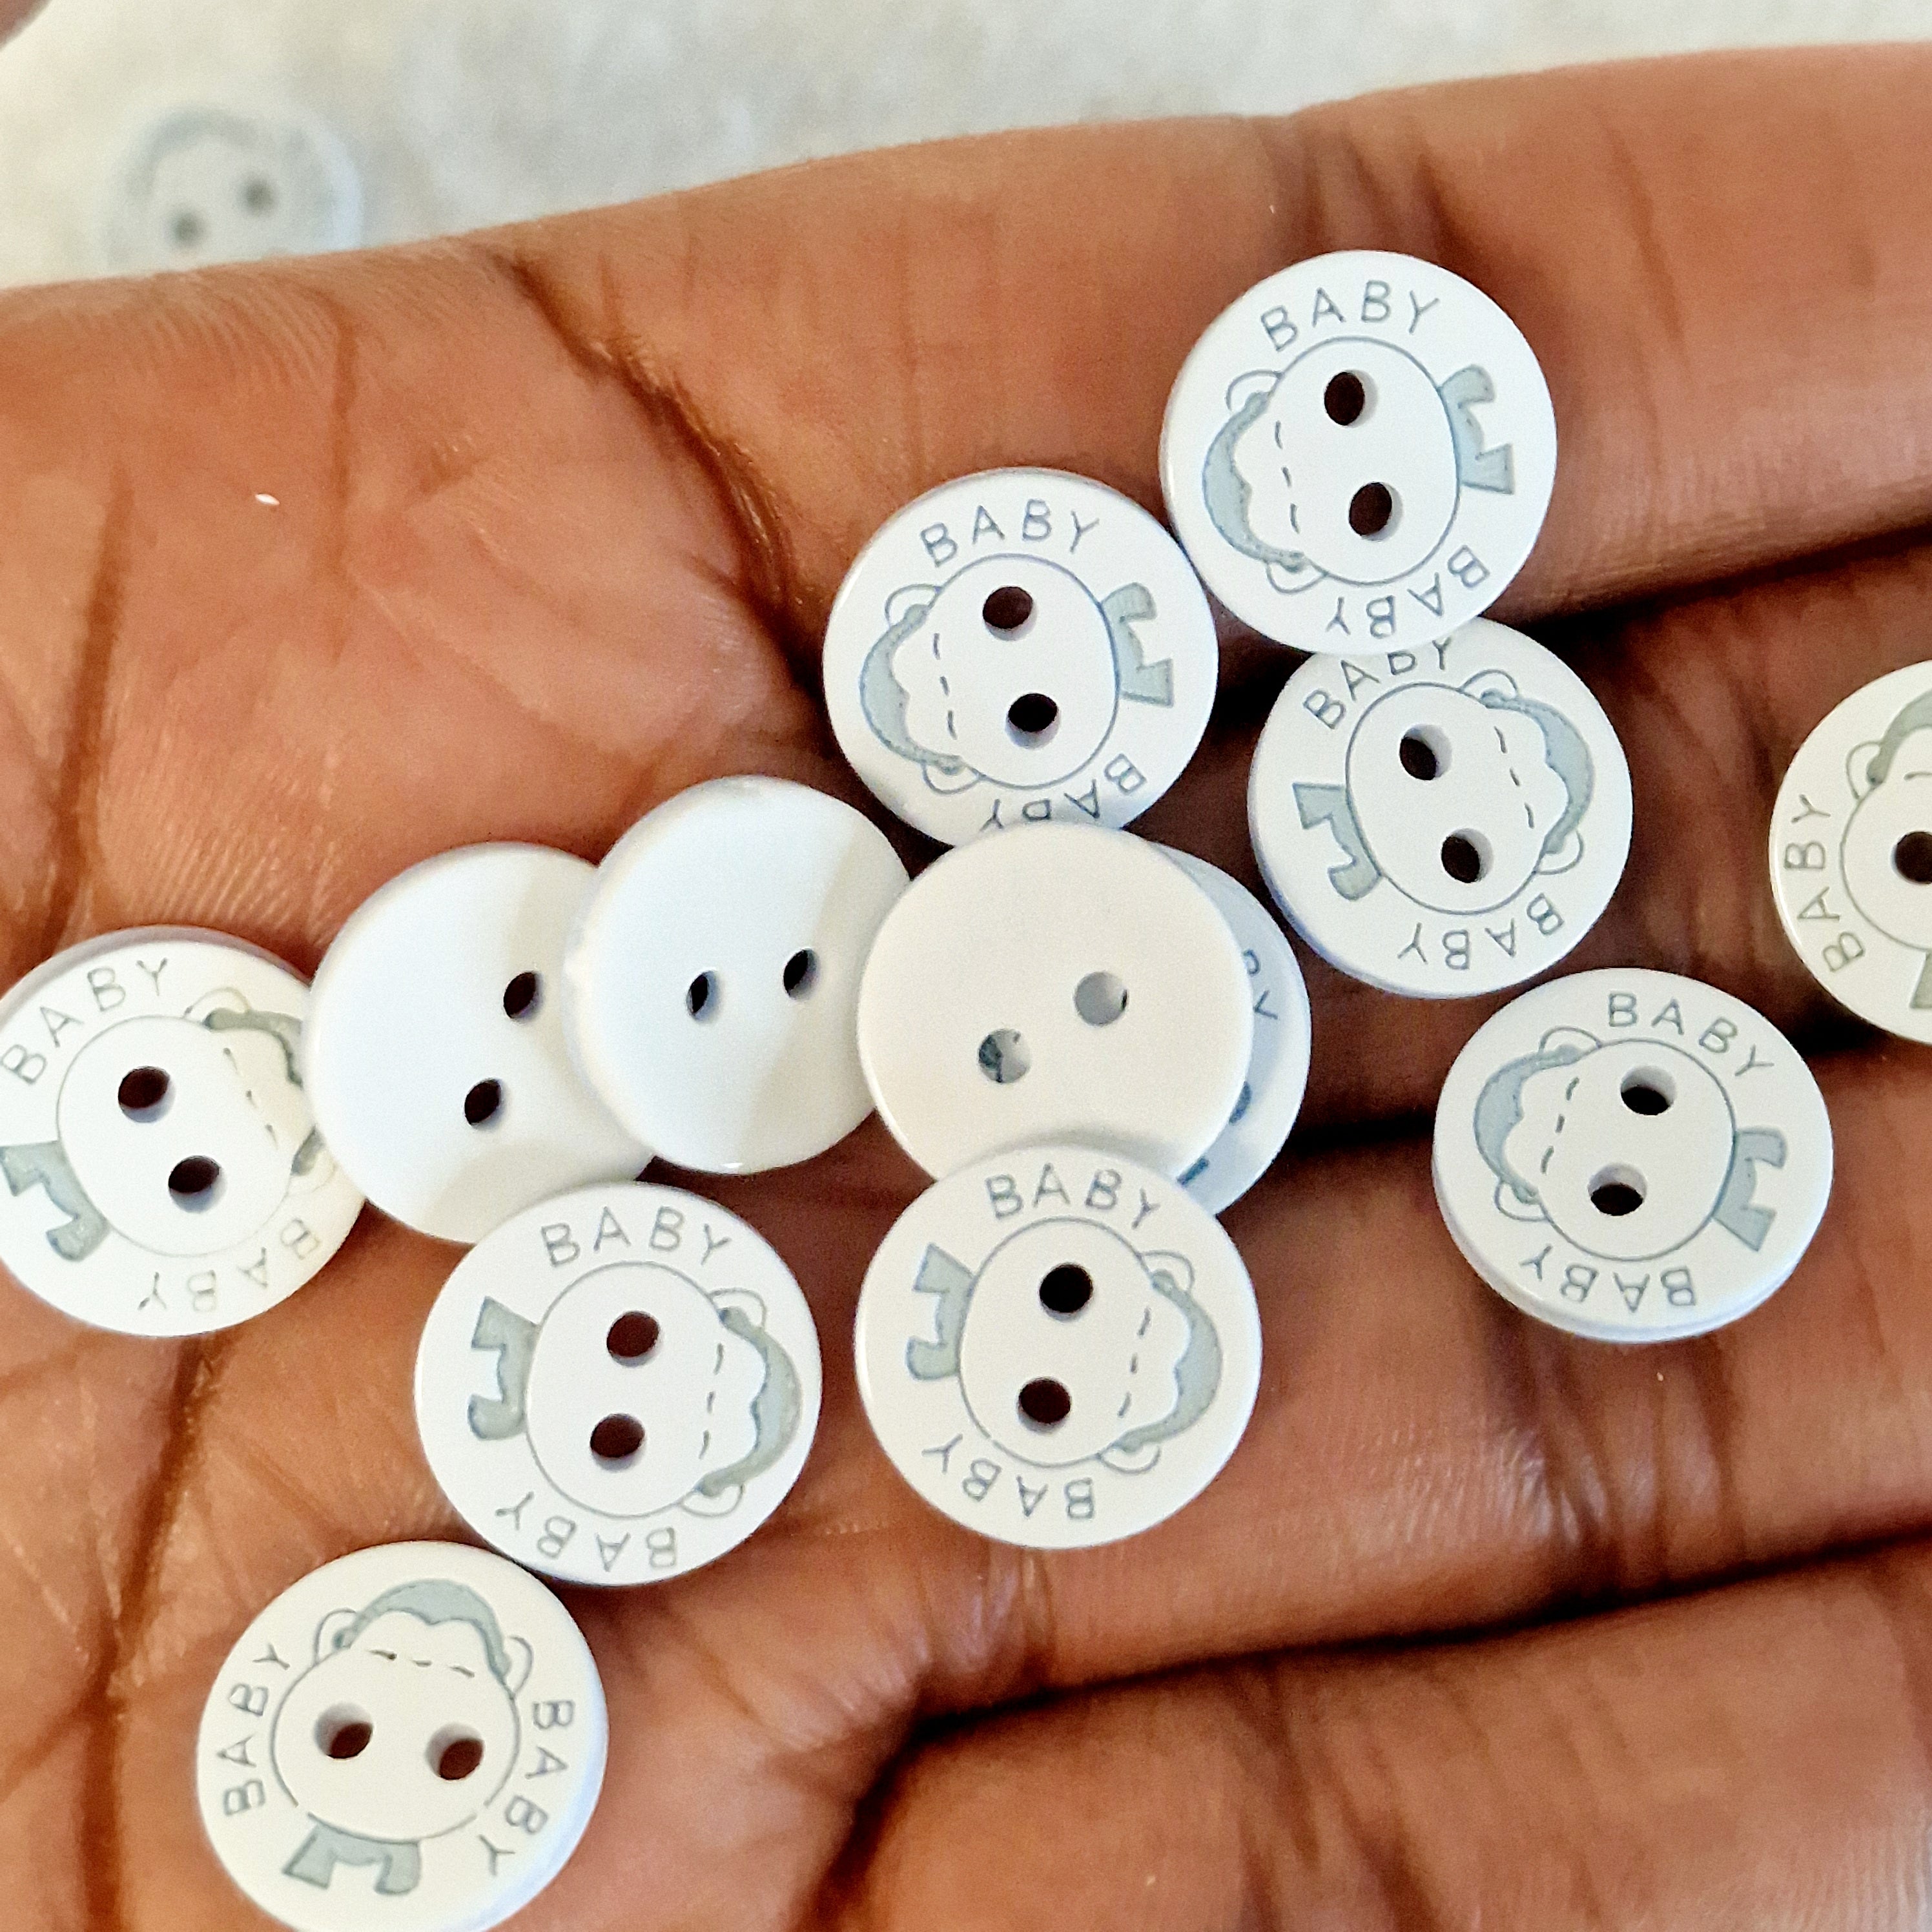 MajorCrafts 48pcs 12.5mm Light Blue & White 'Baby' Printed 2 Holes Small Round Resin Sewing Buttons